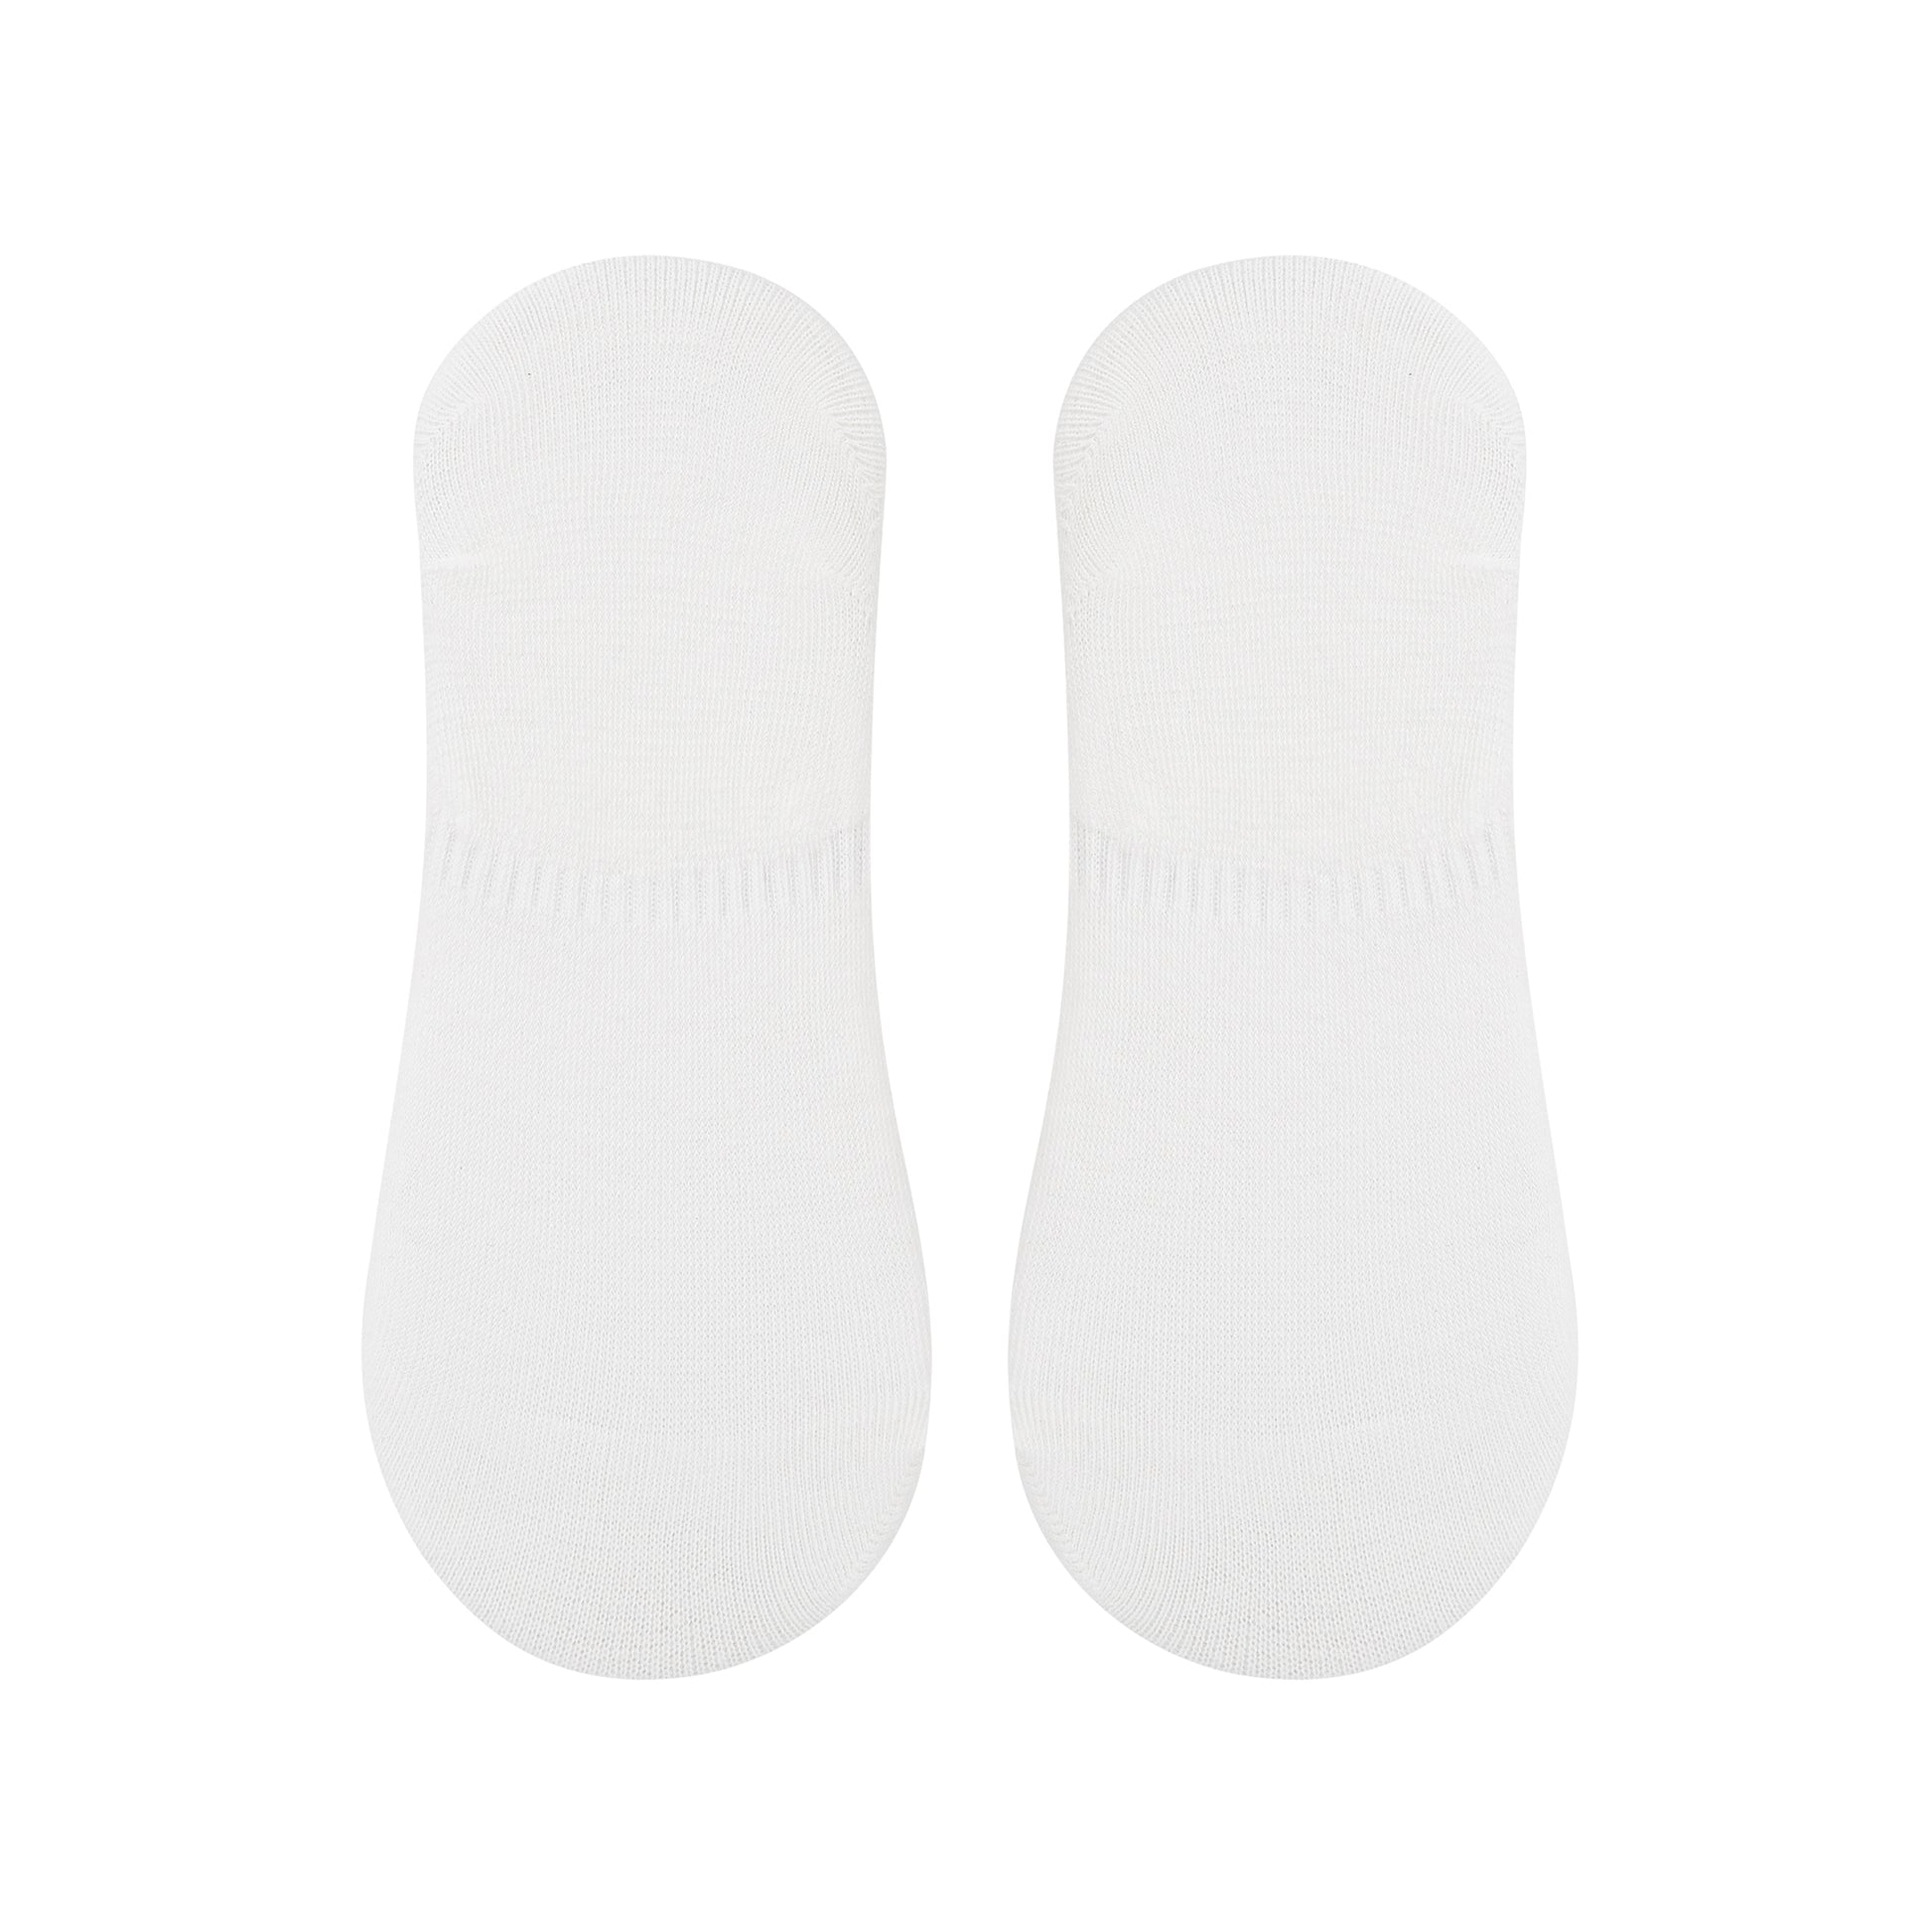 Women's Plain White Invisible Socks with Animal Print - IDENTITY Apparel Shop